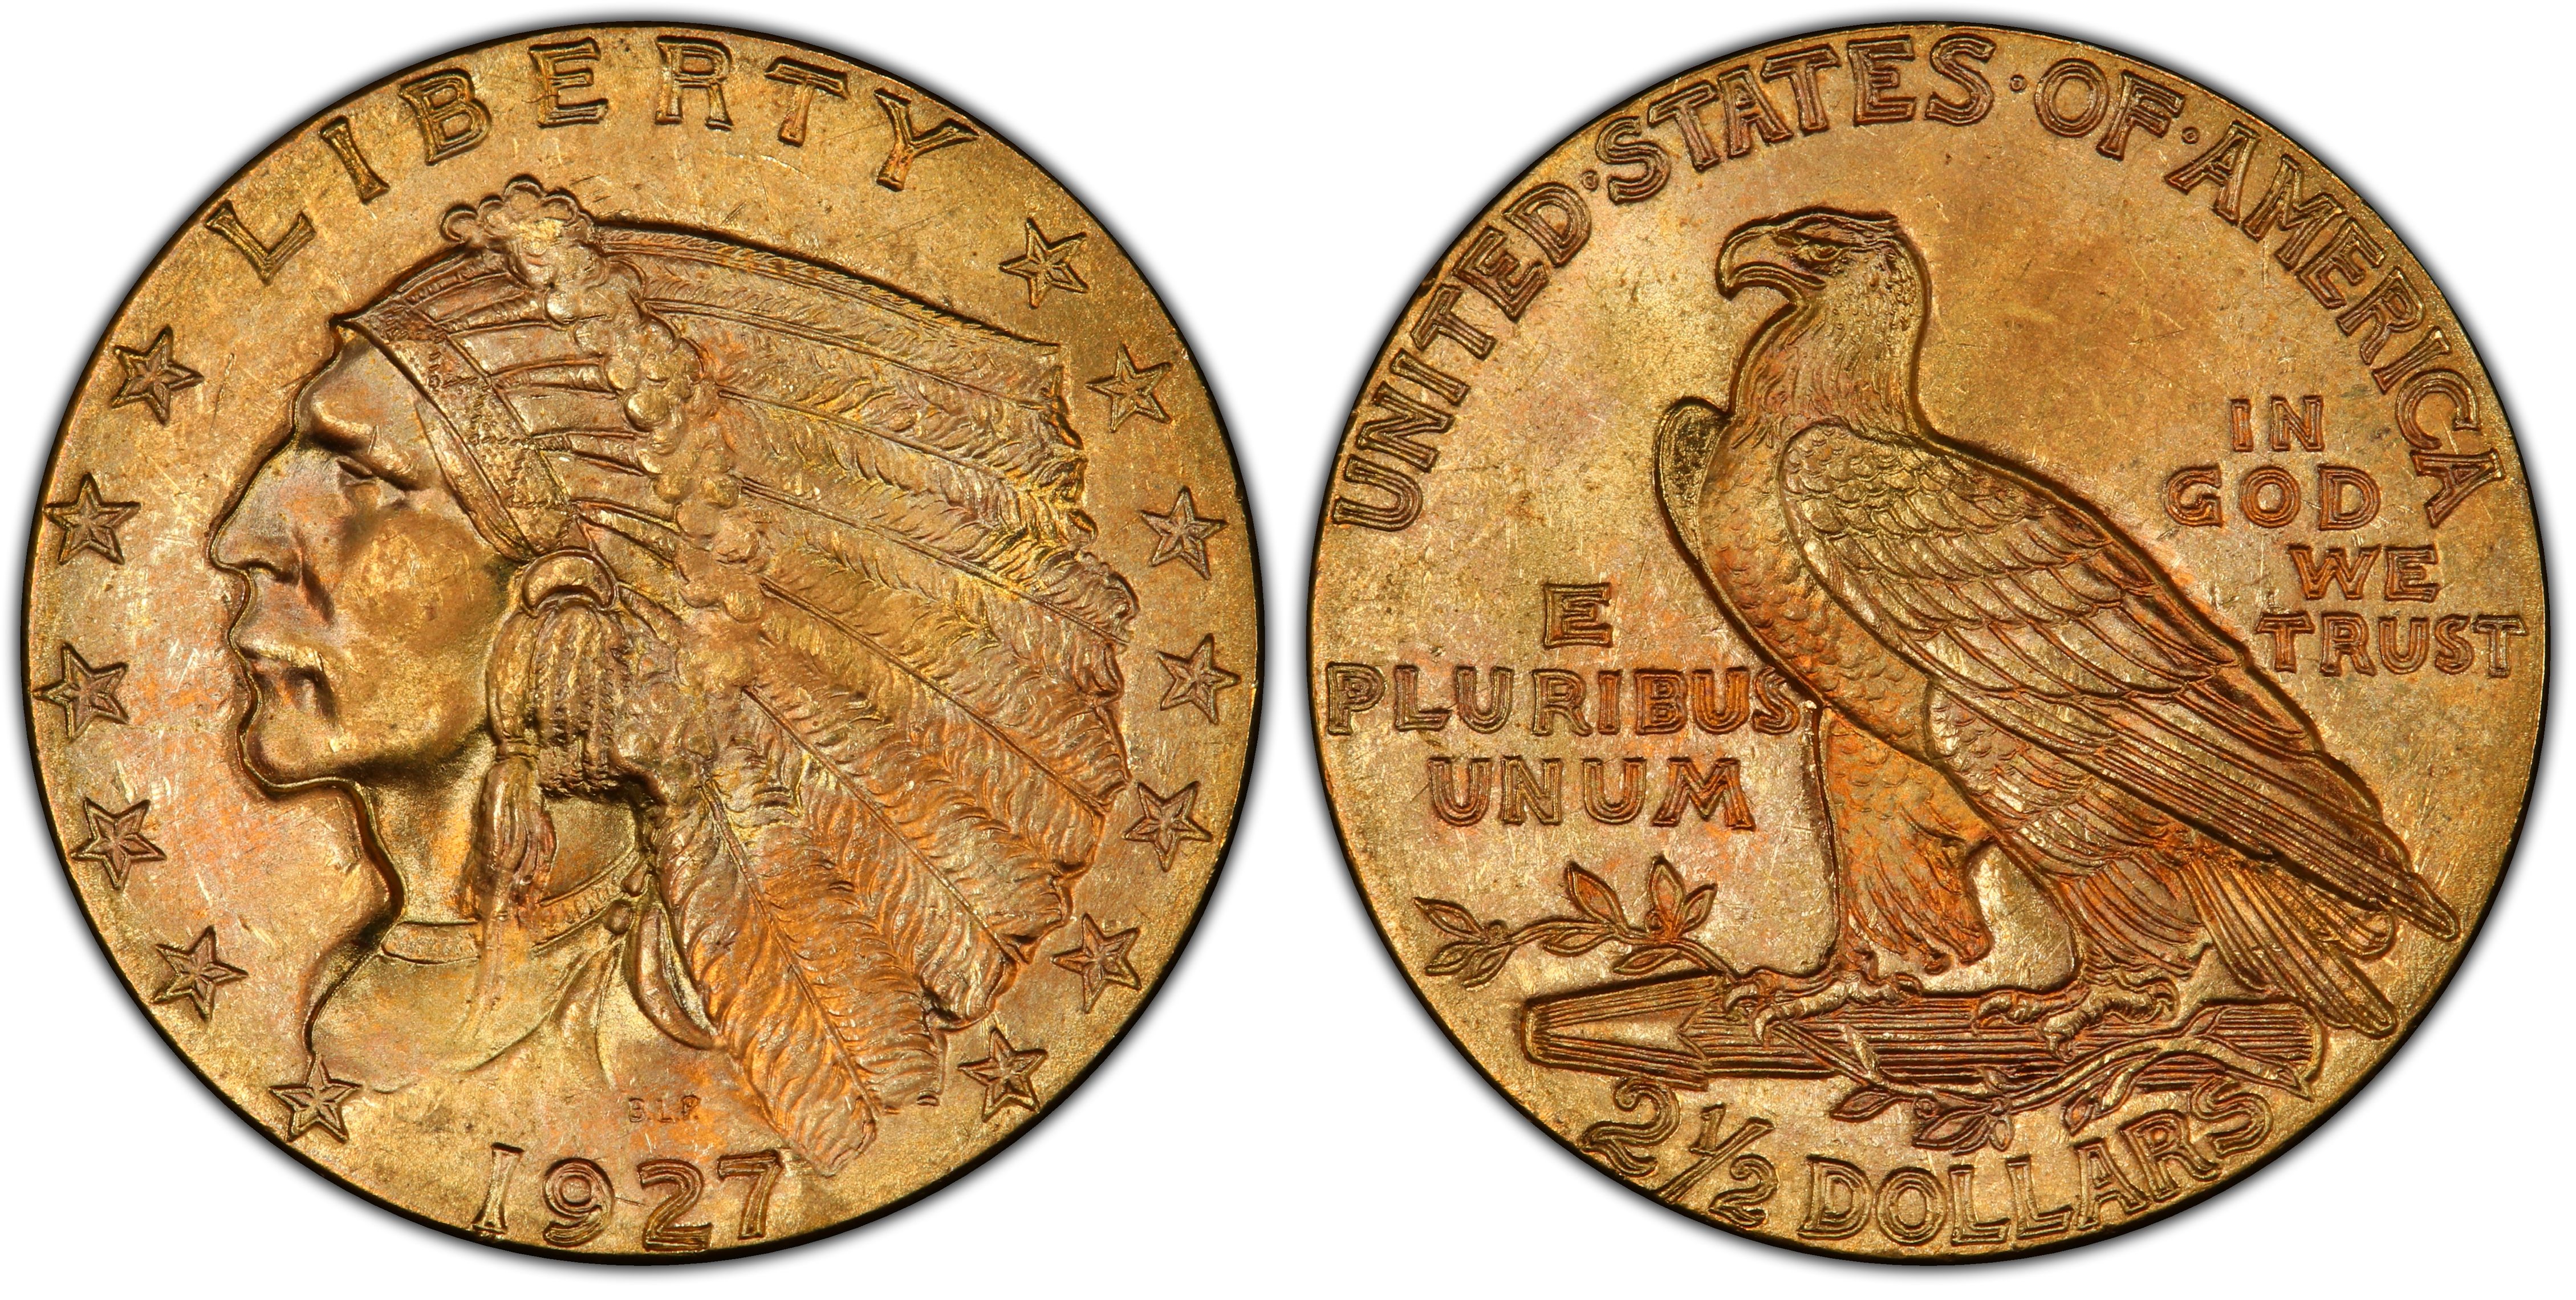 1927 $2.50 (Regular Strike) Indian $2.5 - PCGS CoinFacts